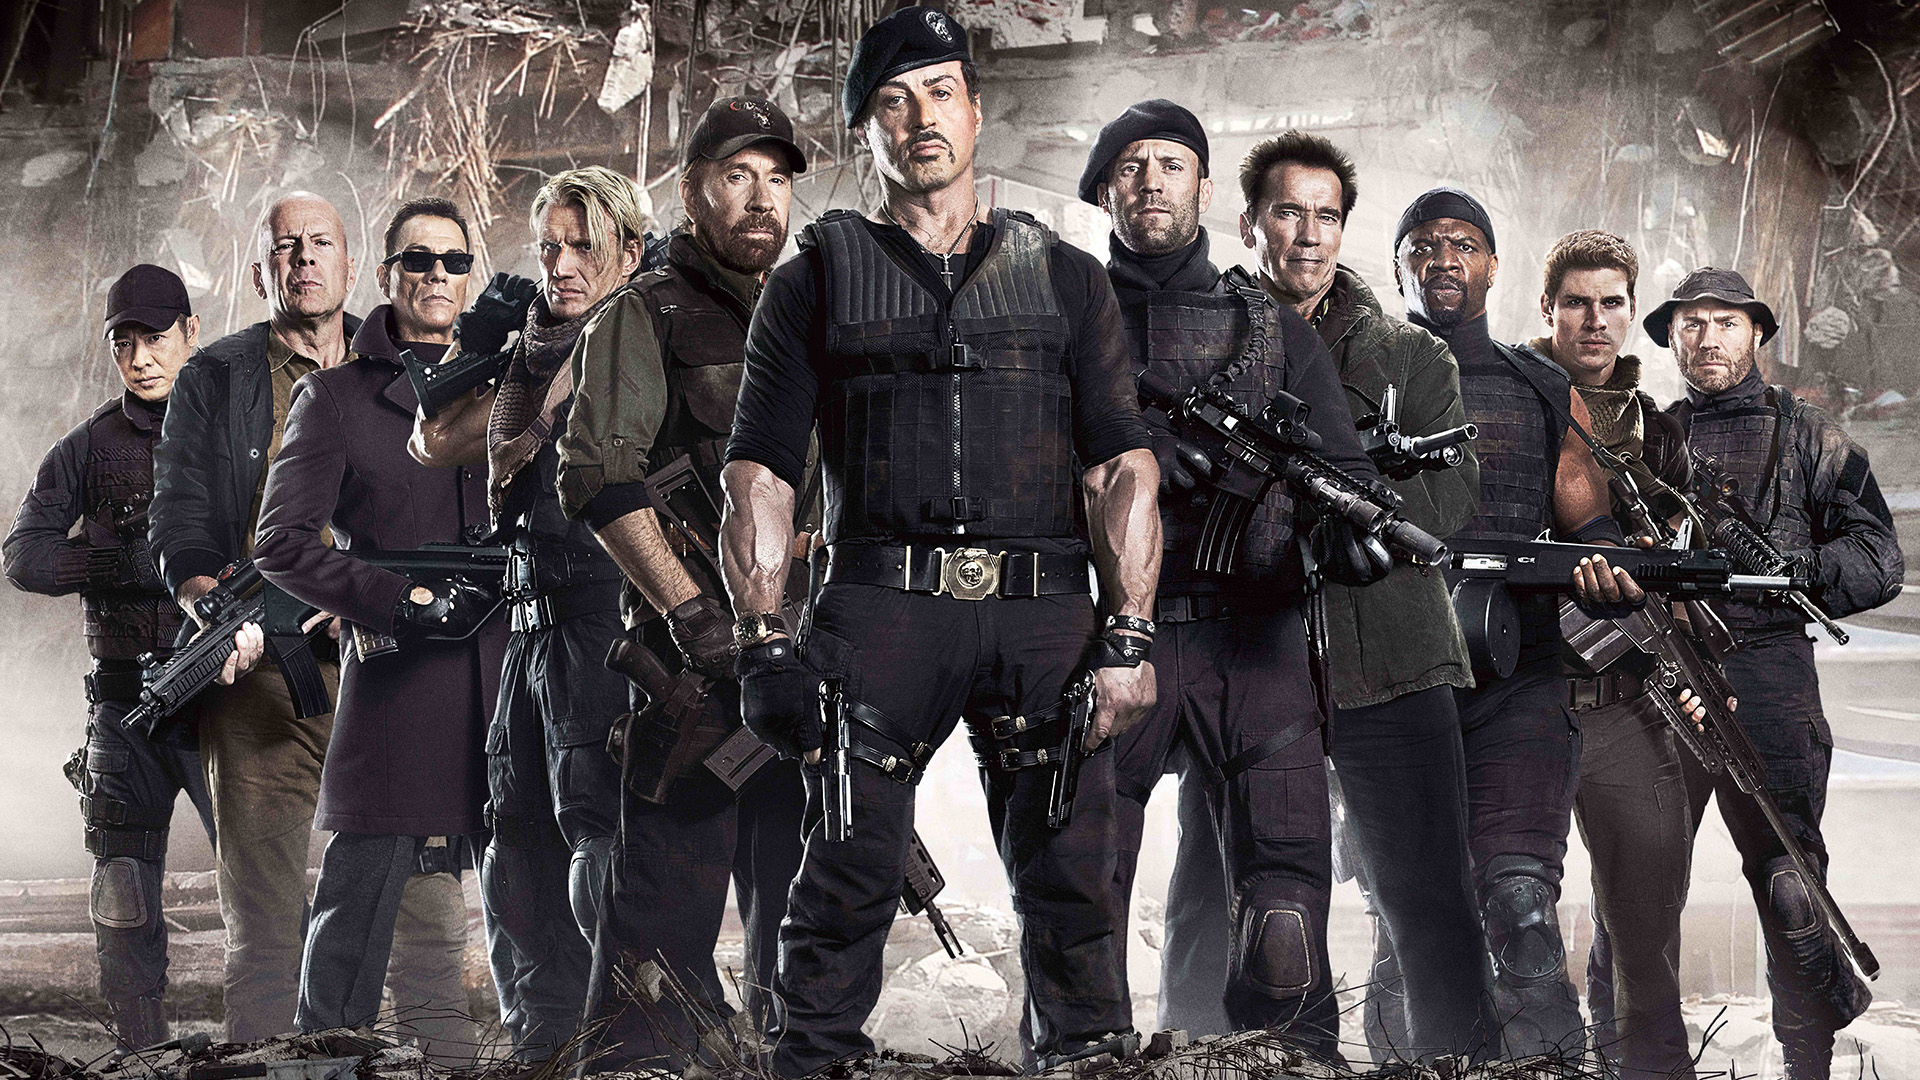 wallpapers movie, the expendables 2, arnold schwarzenegger, barney ross, billy (the expendables), booker (the expendables), bruce willis, chuck norris, church (the expendables), dolph lundgren, gunnar jensen, hale caesar, jason statham, jean claude van damme, jet li, lee christmas, liam hemsworth, maggie (the expendables), randy couture, sylvester stallone, terry crews, toll road, trench (the expendables), vilain (the expendables), yin yang (the expendables), the expendables